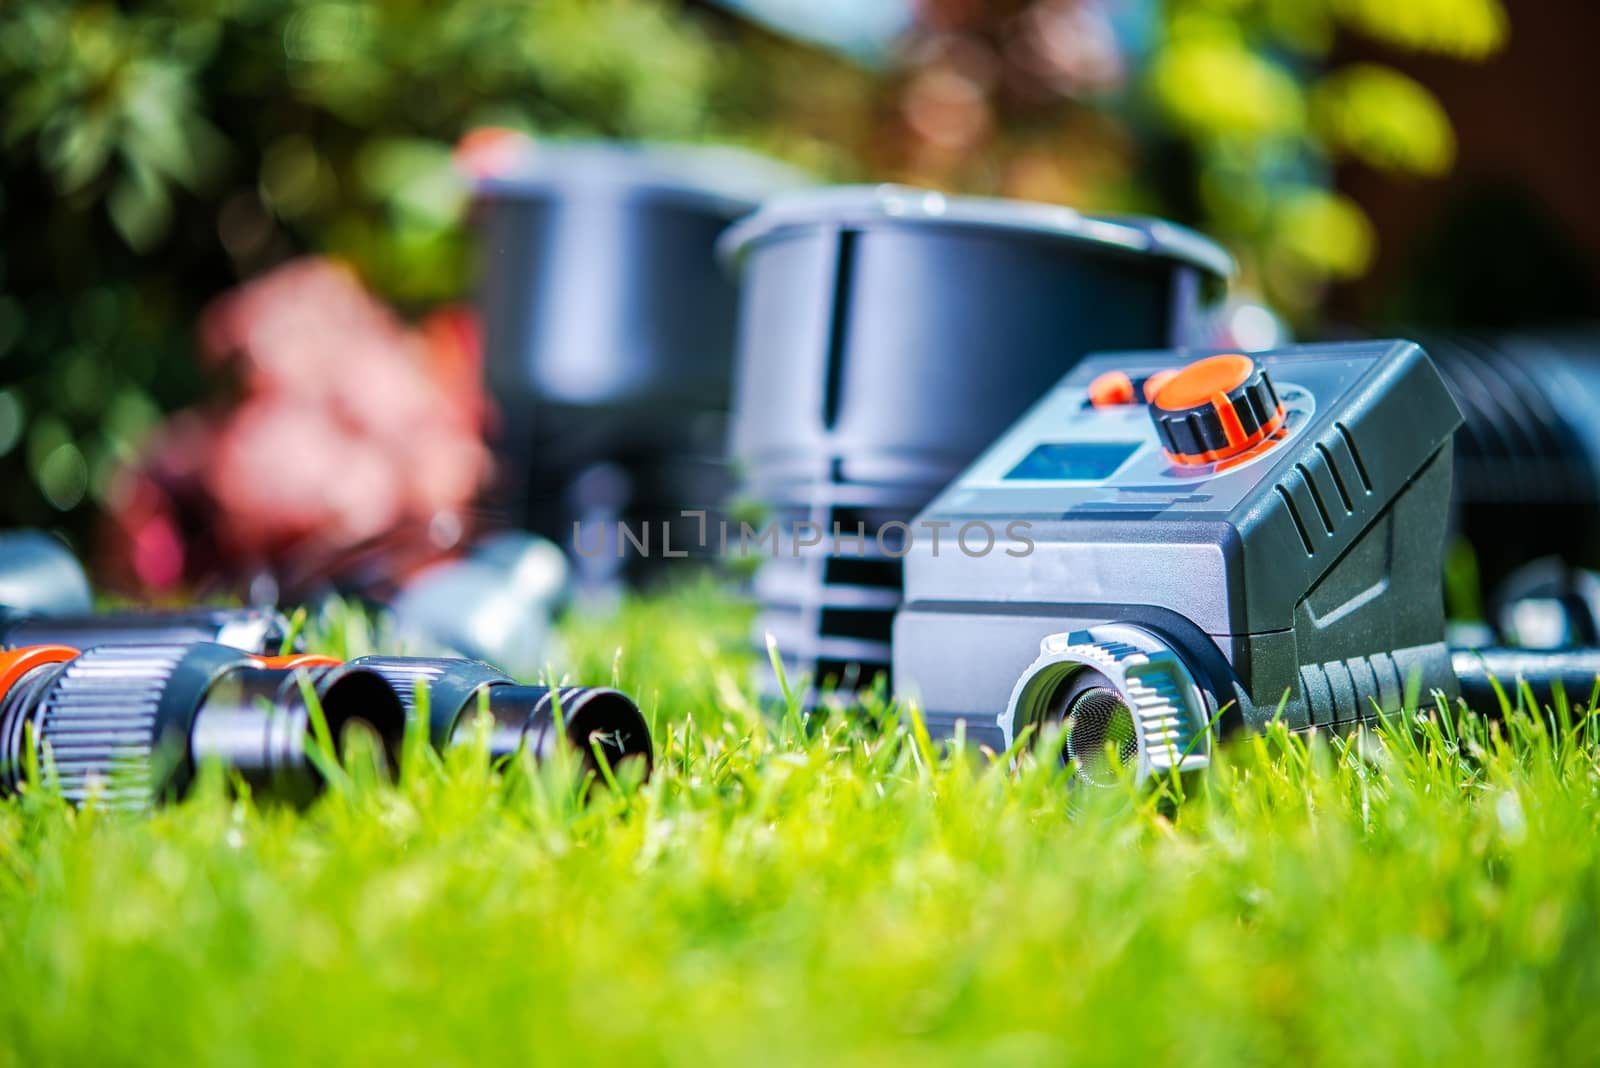 Garden Watering System Elements in the Grass. Closeup Photo. Building Automatic Backyard Water Sprayers.